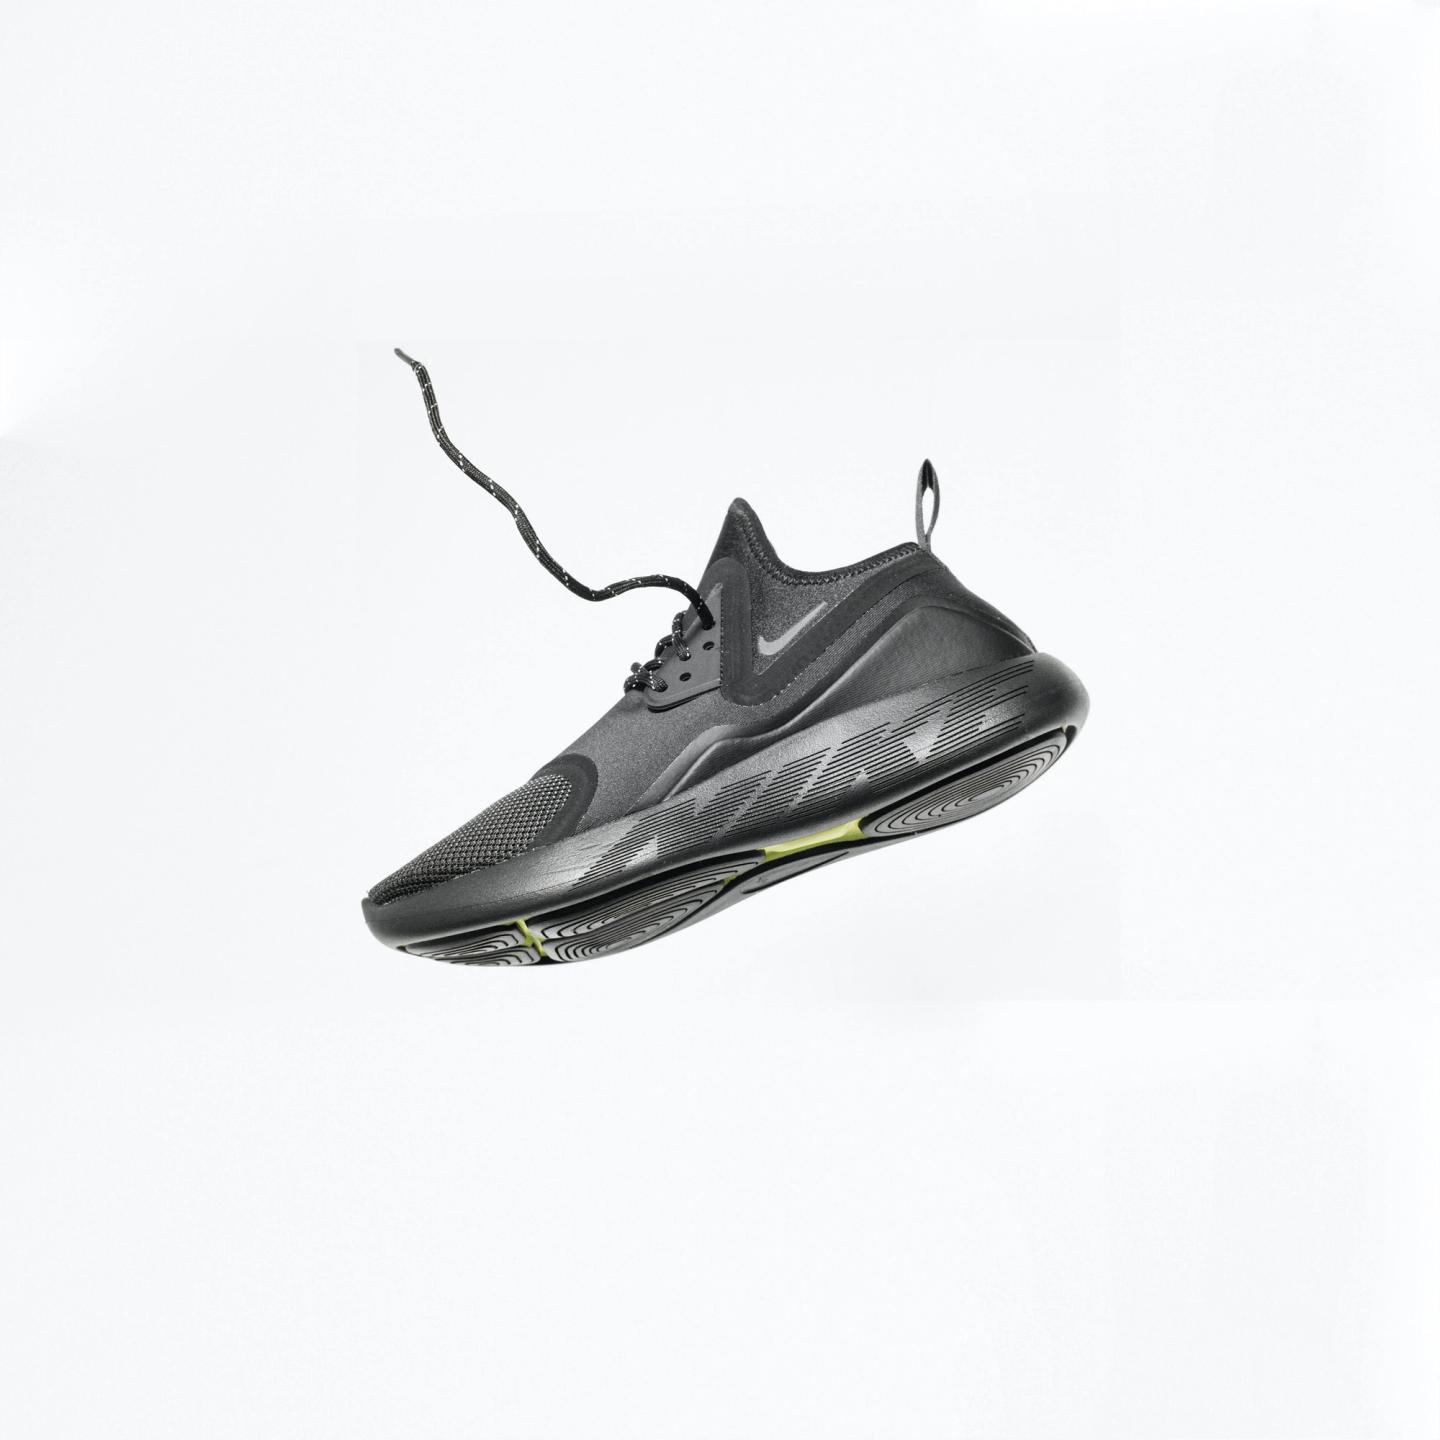 a black nike shoe is floating in the air on a white background .​​​​‌﻿‍﻿​‍​‍‌‍﻿﻿‌﻿​‍‌‍‍‌‌‍‌﻿‌‍‍‌‌‍﻿‍​‍​‍​﻿‍‍​‍​‍‌﻿​﻿‌‍​‌‌‍﻿‍‌‍‍‌‌﻿‌​‌﻿‍‌​‍﻿‍‌‍‍‌‌‍﻿﻿​‍​‍​‍﻿​​‍​‍‌‍‍​‌﻿​‍‌‍‌‌‌‍‌‍​‍​‍​﻿‍‍​‍​‍‌‍‍​‌﻿‌​‌﻿‌​‌﻿​​​﻿‍‍​‍﻿﻿​‍﻿﻿‌‍﻿​‌‍﻿﻿‌‍​﻿‌‍​‌‌‍﻿​‌‍‍​‌‍﻿﻿‌﻿​﻿‌﻿‌​​﻿‍‍​﻿​﻿​﻿​﻿​﻿​﻿​﻿​﻿​‍﻿﻿‌‍‍‌‌‍﻿‍‌﻿‌​‌‍‌‌‌‍﻿‍‌﻿‌​​‍﻿﻿‌‍‌‌‌‍‌​‌‍‍‌‌﻿‌​​‍﻿﻿‌‍﻿‌‌‍﻿﻿‌‍‌​‌‍‌‌​﻿﻿‌‌﻿​​‌﻿​‍‌‍‌‌‌﻿​﻿‌‍‌‌‌‍﻿‍‌﻿‌​‌‍​‌‌﻿‌​‌‍‍‌‌‍﻿﻿‌‍﻿‍​﻿‍﻿‌‍‍‌‌‍‌​​﻿﻿‌​﻿​‌‌‍​‍​﻿‌​‌‍​‌​﻿​﻿​﻿‍​‌‍‌‌​﻿‍​​‍﻿‌‌‍​﻿‌‍​‌‌‍​﻿​﻿‌​​‍﻿‌​﻿‌​​﻿​‍‌‍​﻿​﻿​‌​‍﻿‌‌‍​‍‌‍​‌​﻿‌​​﻿​‍​‍﻿‌‌‍​‌‌‍​﻿​﻿‌‌​﻿‌‍‌‍​‌‌‍‌‍​﻿‍‌​﻿​​​﻿‍‌​﻿‌‌‌‍‌​​﻿​​​﻿‍﻿‌﻿‌​‌﻿‍‌‌﻿​​‌‍‌‌​﻿﻿‌‌﻿​﻿‌‍‍​‌‍﻿﻿‌‍‌‌​﻿‍﻿‌﻿​​‌‍​‌‌﻿‌​‌‍‍​​﻿﻿‌‌‍﻿‌‌‍‌‌‌‍‌​‌‍‍‌‌‍​‌​‍‌‌​﻿‌‌‌​​‍‌‌﻿﻿‌‍‍﻿‌‍‌‌‌﻿‍‌​‍‌‌​﻿​﻿‌​‌​​‍‌‌​﻿​﻿‌​‌​​‍‌‌​﻿​‍​﻿​‍‌‍‌‌​﻿‌﻿​﻿​​‌‍‌‌​﻿​﻿​﻿‌‍​﻿‌‌‌‍​﻿​﻿‍​‌‍‌‍‌‍​‌​﻿​‍​‍‌‌​﻿​‍​﻿​‍​‍‌‌​﻿‌‌‌​‌​​‍﻿‍‌‍​‌‌‍﻿​‌﻿‌​​﻿﻿﻿‌‍​‍‌‍​‌‌﻿​﻿‌‍‌‌‌‌‌‌‌﻿​‍‌‍﻿​​﻿﻿‌‌‍‍​‌﻿‌​‌﻿‌​‌﻿​​​‍‌‌​﻿​﻿‌​​‌​‍‌‌​﻿​‍‌​‌‍​‍‌‌​﻿​‍‌​‌‍‌‍﻿​‌‍﻿﻿‌‍​﻿‌‍​‌‌‍﻿​‌‍‍​‌‍﻿﻿‌﻿​﻿‌﻿‌​​‍‌‌​﻿​﻿‌​​‌​﻿​﻿​﻿​﻿​﻿​﻿​﻿​﻿​‍‌‍‌‍‍‌‌‍‌​​﻿﻿‌​﻿​‌‌‍​‍​﻿‌​‌‍​‌​﻿​﻿​﻿‍​‌‍‌‌​﻿‍​​‍﻿‌‌‍​﻿‌‍​‌‌‍​﻿​﻿‌​​‍﻿‌​﻿‌​​﻿​‍‌‍​﻿​﻿​‌​‍﻿‌‌‍​‍‌‍​‌​﻿‌​​﻿​‍​‍﻿‌‌‍​‌‌‍​﻿​﻿‌‌​﻿‌‍‌‍​‌‌‍‌‍​﻿‍‌​﻿​​​﻿‍‌​﻿‌‌‌‍‌​​﻿​​​‍‌‍‌﻿‌​‌﻿‍‌‌﻿​​‌‍‌‌​﻿﻿‌‌﻿​﻿‌‍‍​‌‍﻿﻿‌‍‌‌​‍‌‍‌﻿​​‌‍​‌‌﻿‌​‌‍‍​​﻿﻿‌‌‍﻿‌‌‍‌‌‌‍‌​‌‍‍‌‌‍​‌​‍‌‌​﻿‌‌‌​​‍‌‌﻿﻿‌‍‍﻿‌‍‌‌‌﻿‍‌​‍‌‌​﻿​﻿‌​‌​​‍‌‌​﻿​﻿‌​‌​​‍‌‌​﻿​‍​﻿​‍‌‍‌‌​﻿‌﻿​﻿​​‌‍‌‌​﻿​﻿​﻿‌‍​﻿‌‌‌‍​﻿​﻿‍​‌‍‌‍‌‍​‌​﻿​‍​‍‌‌​﻿​‍​﻿​‍​‍‌‌​﻿‌‌‌​‌​​‍﻿‍‌‍​‌‌‍﻿​‌﻿‌​​‍​‍‌﻿﻿‌